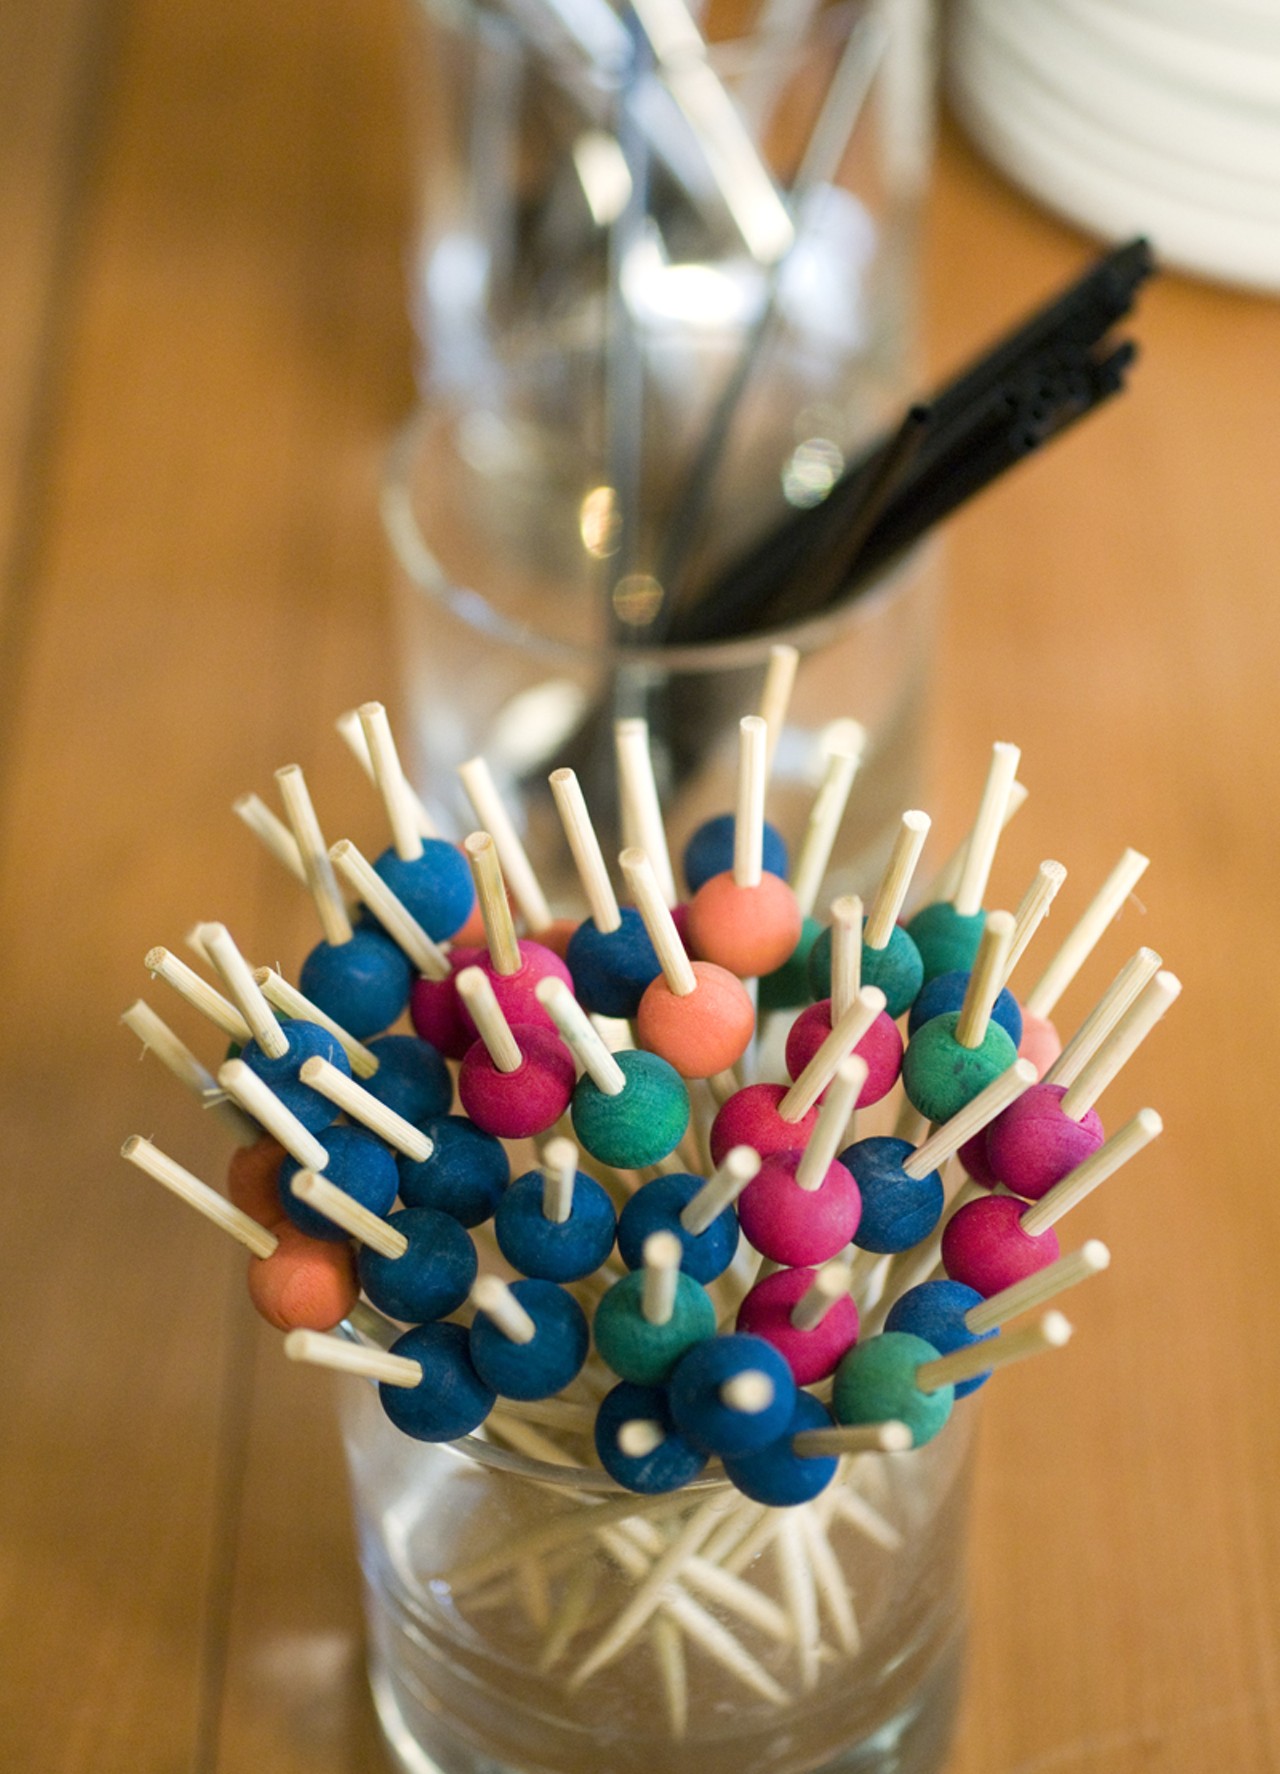 Toothpicks add a splash of color to Kilgore's creations.